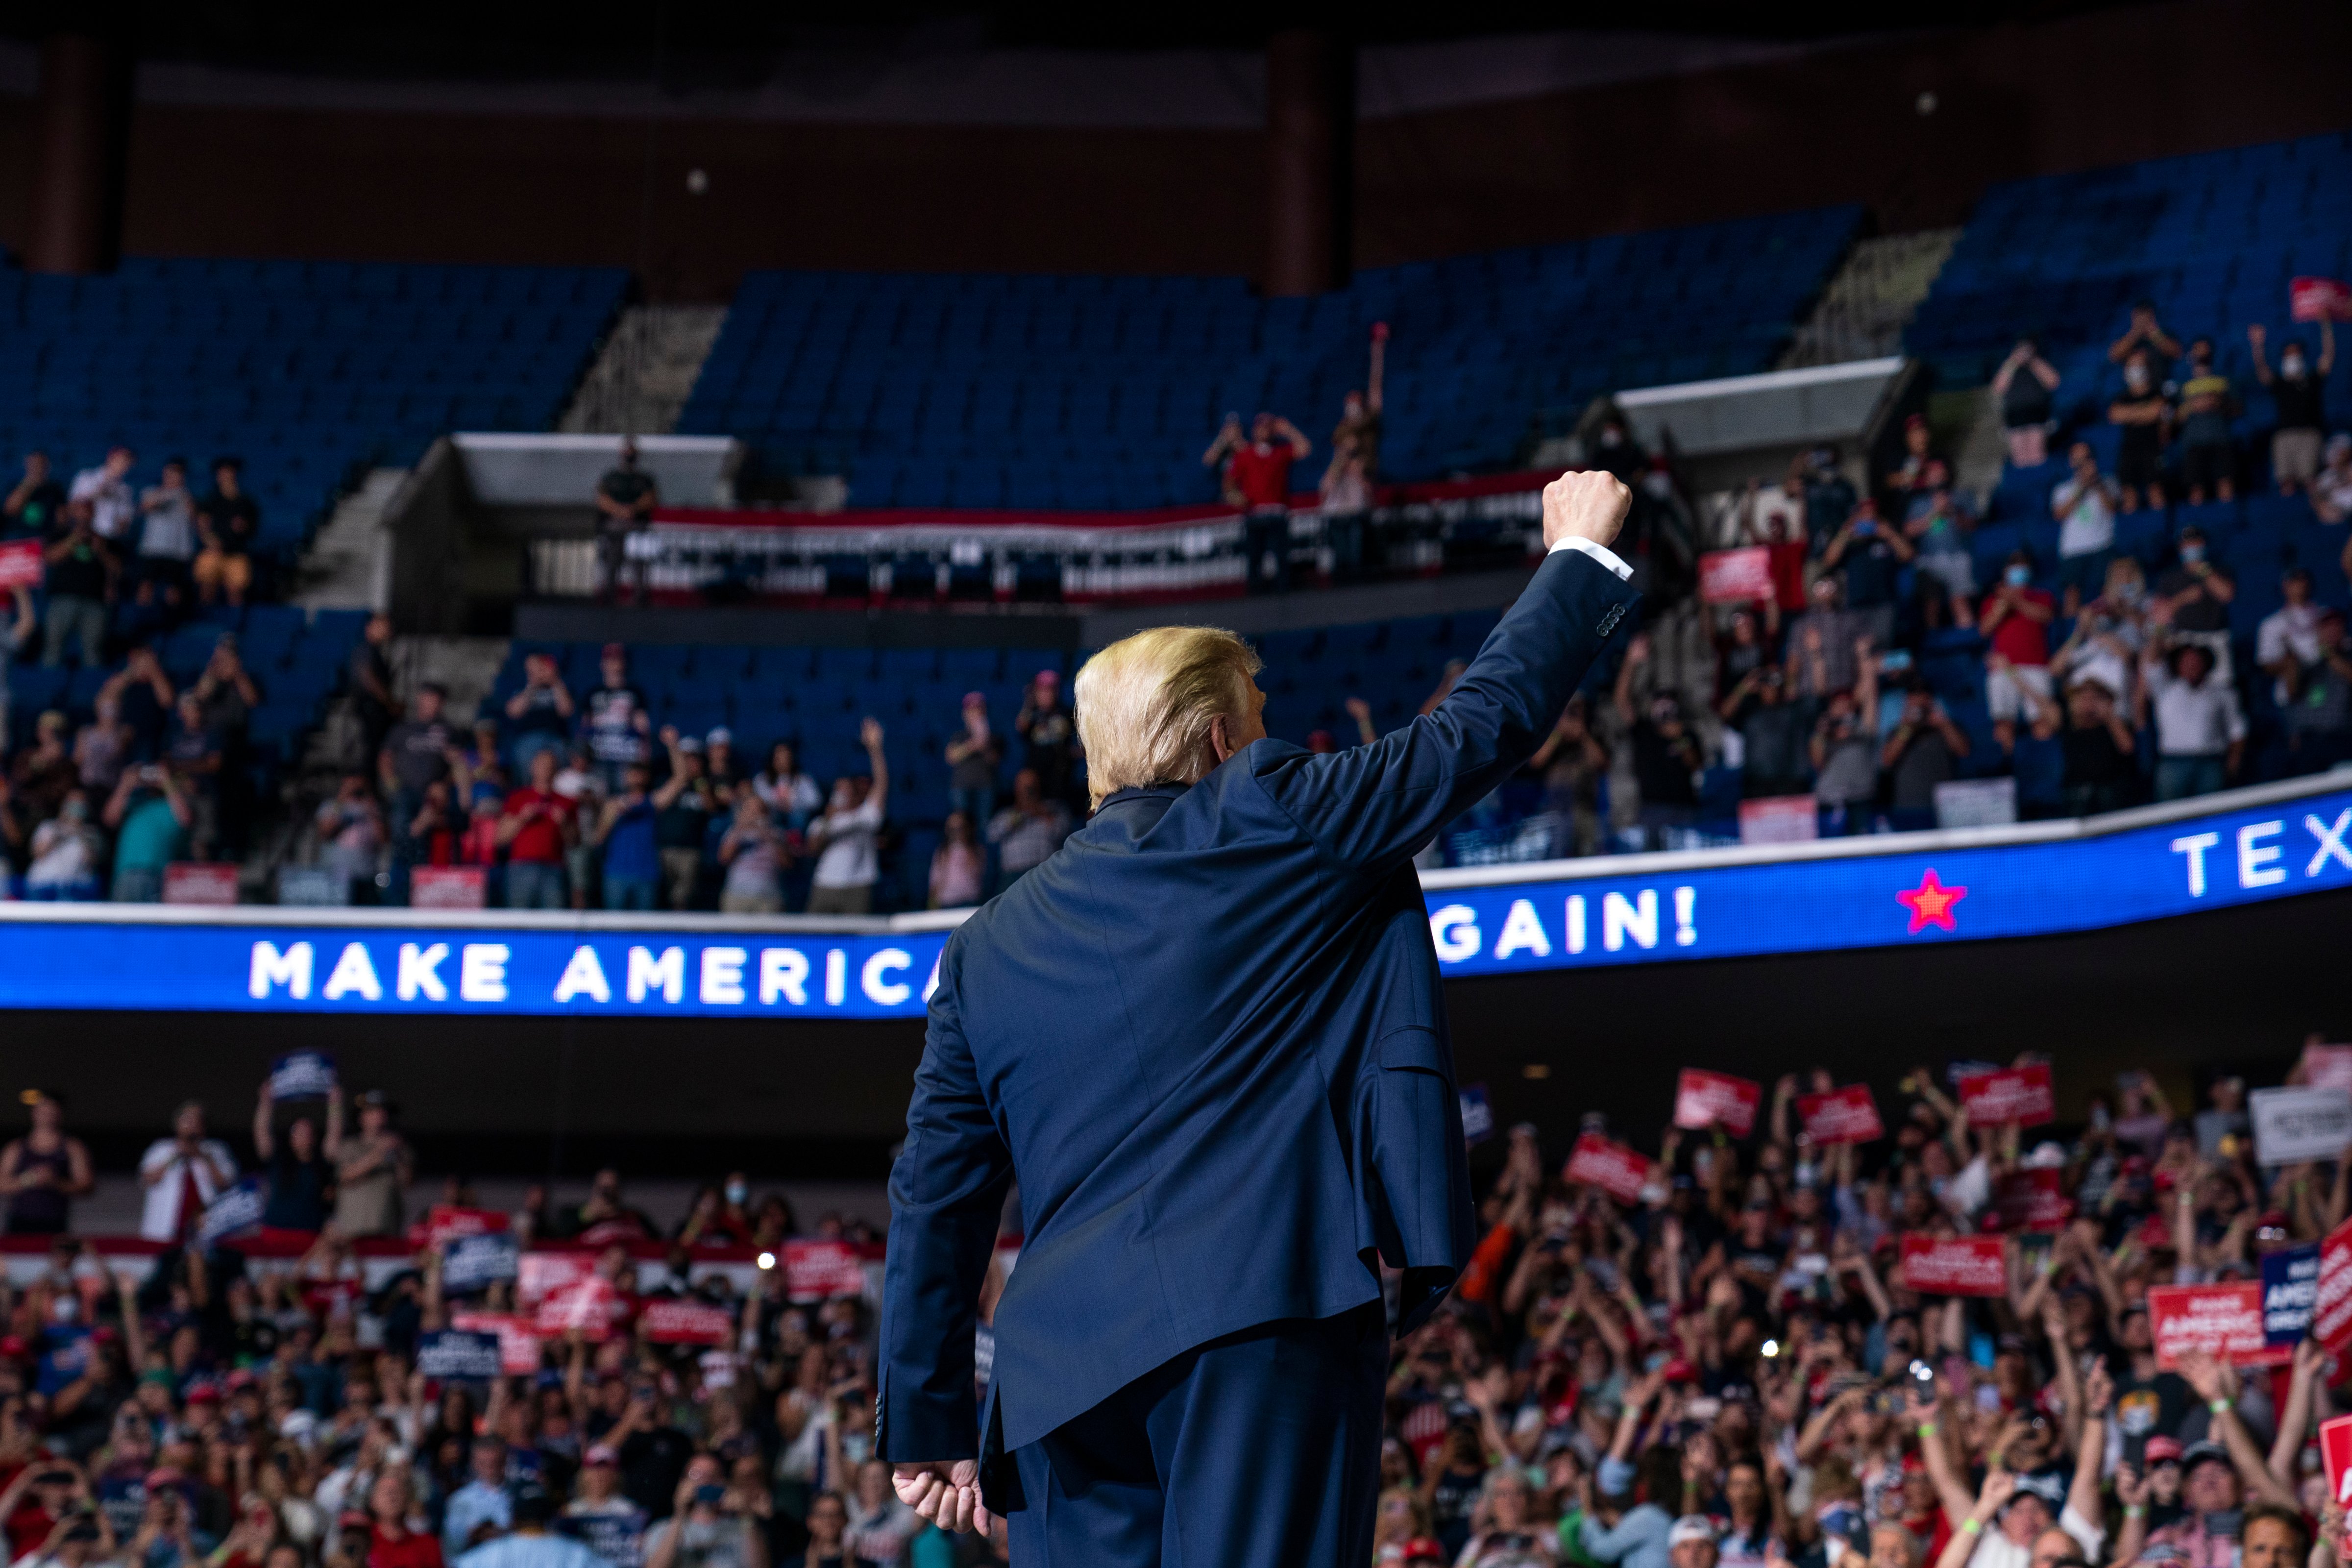 President Donald Trump arrives on stage to speak at a campaign rally at the BOK Center, on June 20, 2020, in Tulsa, Okla. (Evan Vucci—AP)